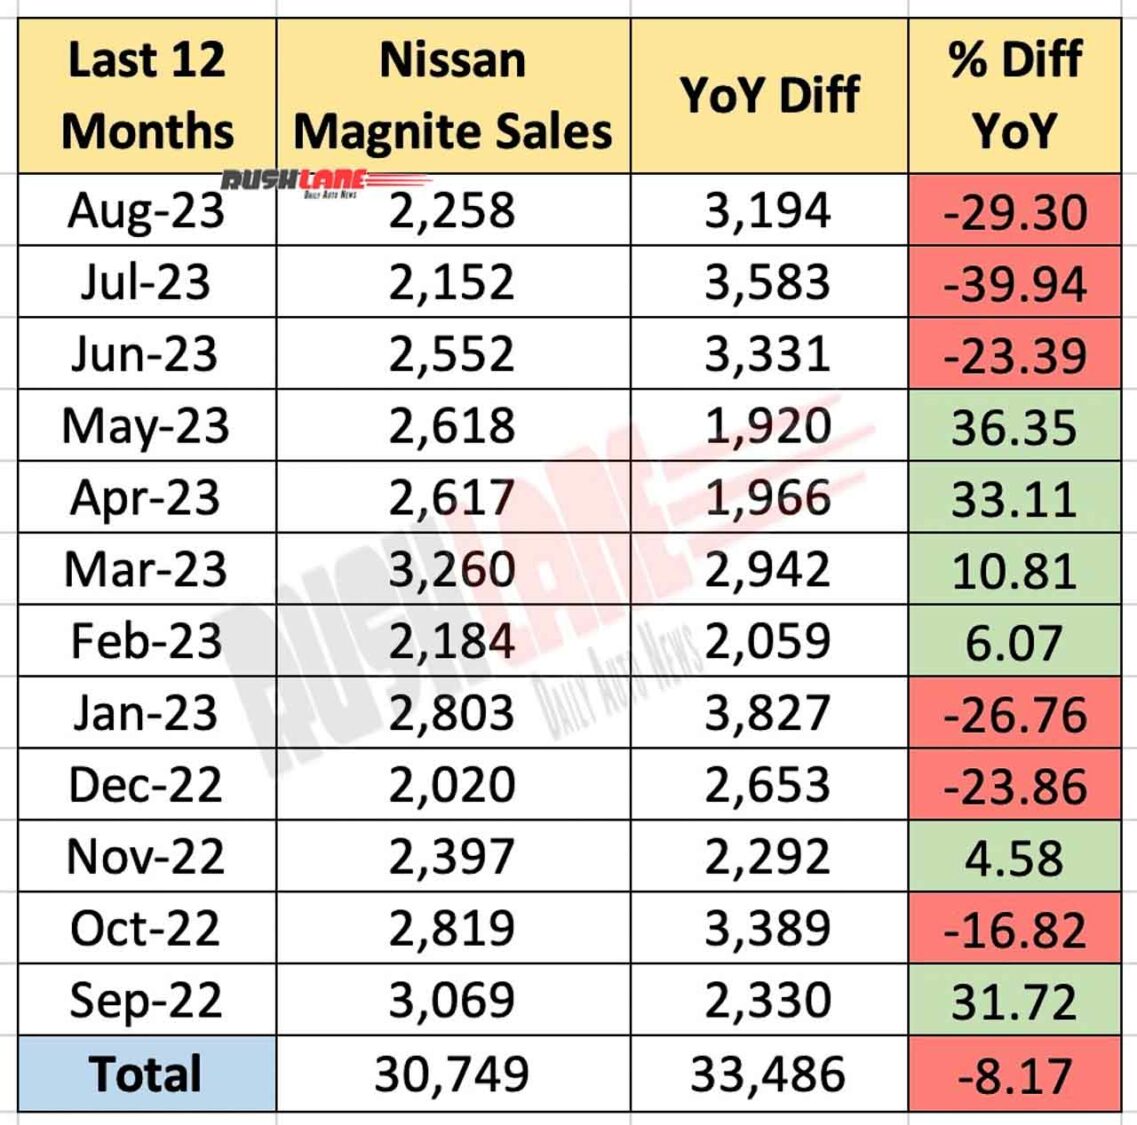 Nissan Magnite sales in the last 12 months vs YoY